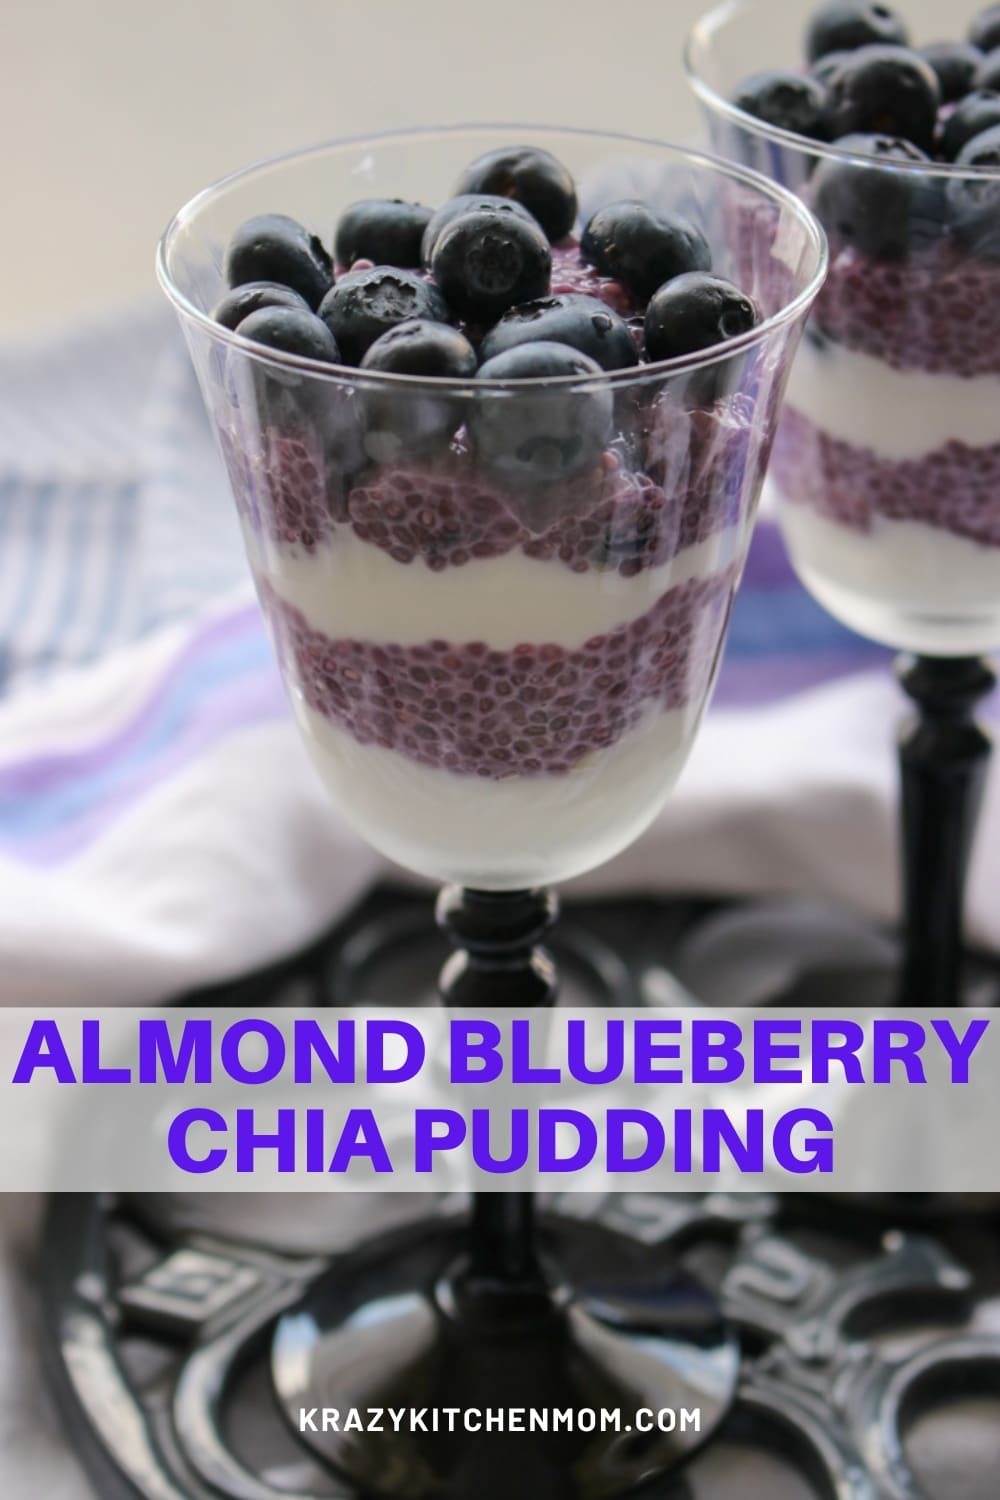 This low-calorie dessert is perfect for those watching calories and those who are not. Made with almond milk, blueberries, and chia seeds via @krazykitchenmom